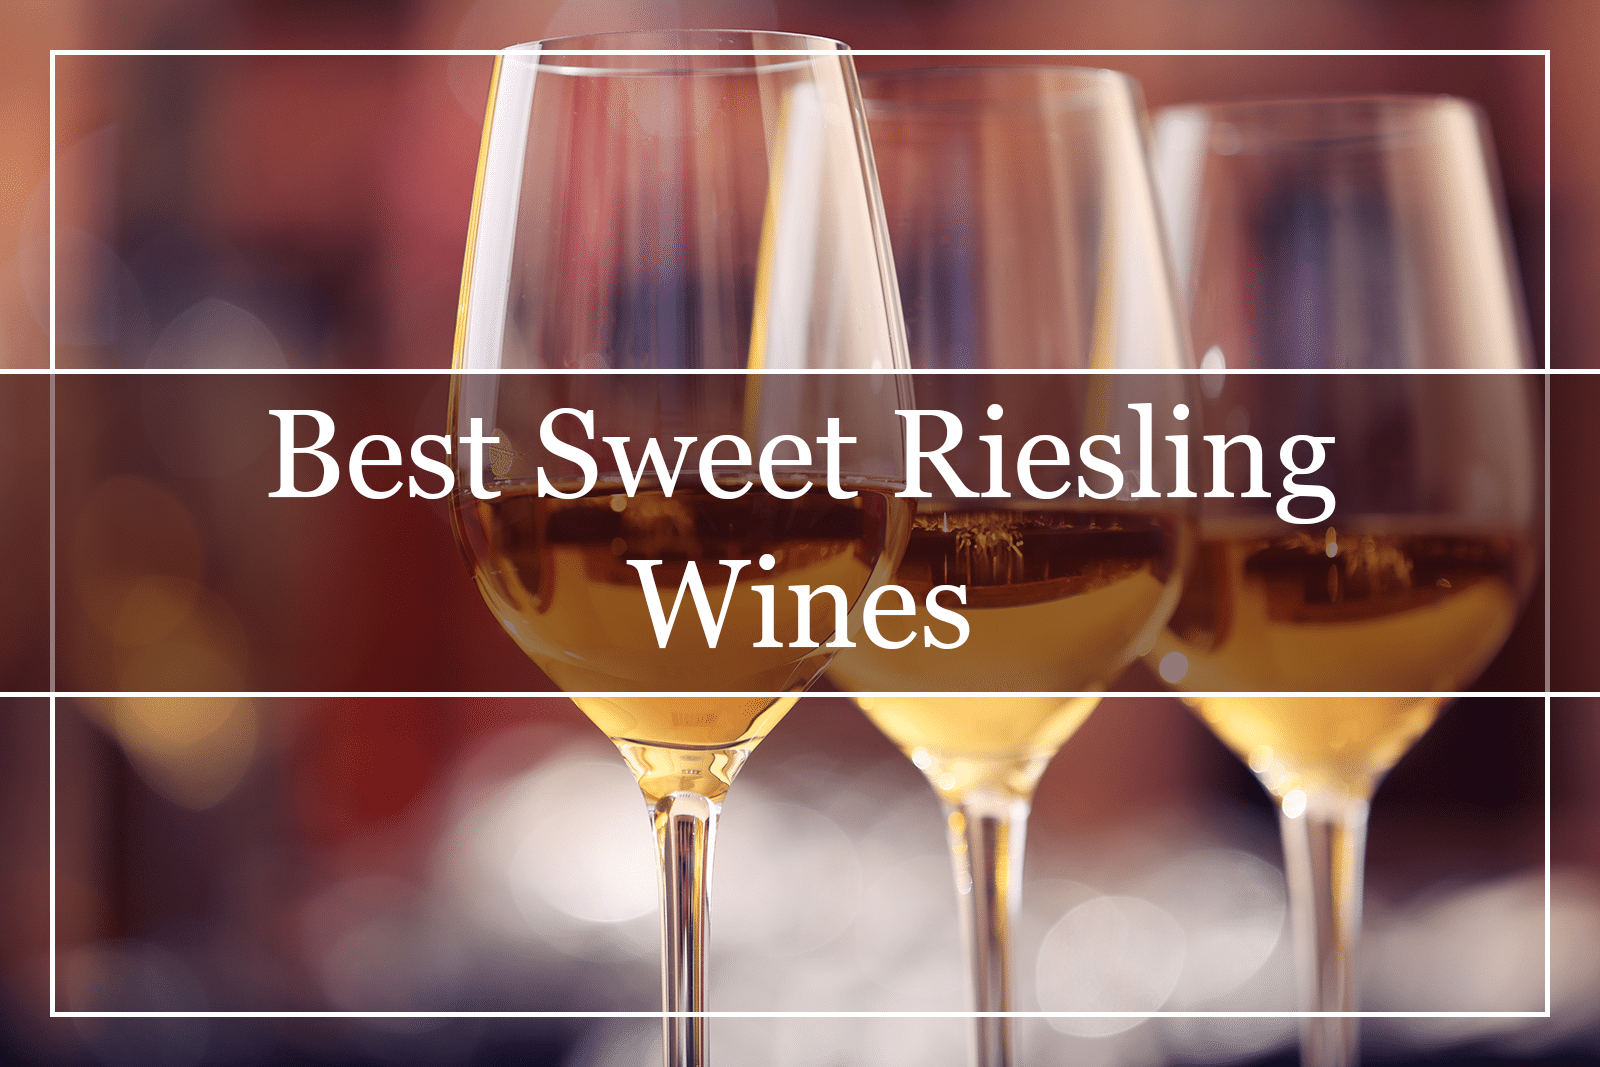 10 Best Sweet Riesling Wines (2021) You Must Try!